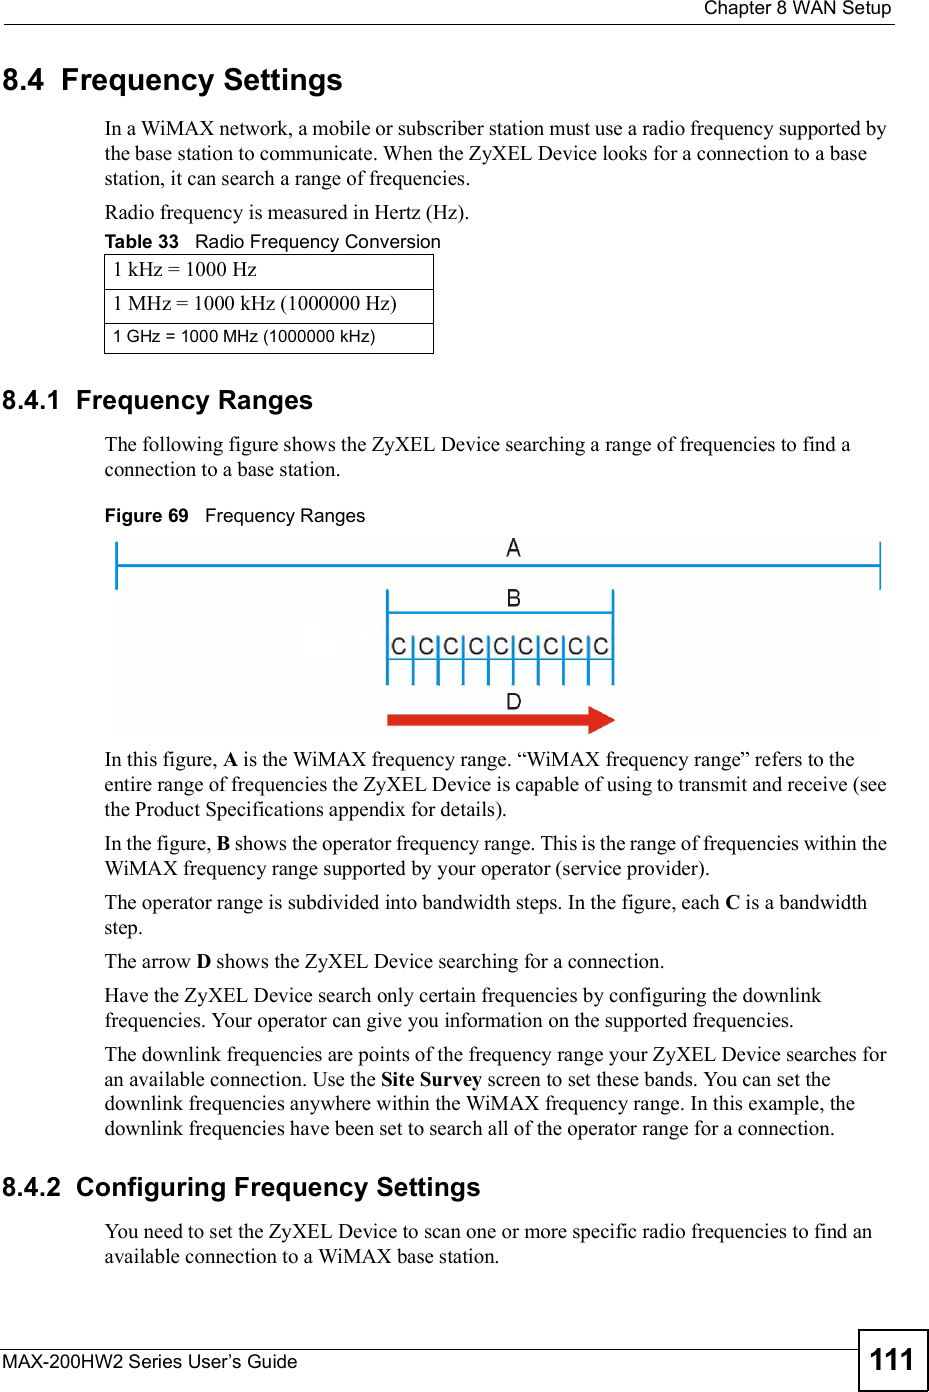  Chapter 8WAN SetupMAX-200HW2 Series User s Guide 1118.4  Frequency SettingsIn a WiMAX network, a mobile or subscriber station must use a radio frequency supported by the base station to communicate. When the ZyXEL Device looks for a connection to a base station, it can search a range of frequencies. Radio frequency is measured in Hertz (Hz). 8.4.1  Frequency RangesThe following figure shows the ZyXEL Device searching a range of frequencies to find a connection to a base station.  Figure 69   Frequency RangesIn this figure, A is the WiMAX frequency range. &quot;WiMAX frequency range# refers to the entire range of frequencies the ZyXEL Device is capable of using to transmit and receive (see the Product Specifications appendix for details). In the figure, B shows the operator frequency range. This is the range of frequencies within the WiMAX frequency range supported by your operator (service provider).The operator range is subdivided into bandwidth steps. In the figure, each C is a bandwidth step.The arrow D shows the ZyXEL Device searching for a connection.Have the ZyXEL Device search only certain frequencies by configuring the downlink frequencies. Your operator can give you information on the supported frequencies. The downlink frequencies are points of the frequency range your ZyXEL Device searches for an available connection. Use the Site Survey screen to set these bands. You can set the downlink frequencies anywhere within the WiMAX frequency range. In this example, the downlink frequencies have been set to search all of the operator range for a connection.8.4.2  Configuring Frequency SettingsYou need to set the ZyXEL Device to scan one or more specific radio frequencies to find an available connection to a WiMAX base station. Table 33   Radio Frequency Conversion1 kHz = 1000 Hz1 MHz = 1000 kHz (1000000 Hz)1 GHz = 1000 MHz (1000000 kHz)